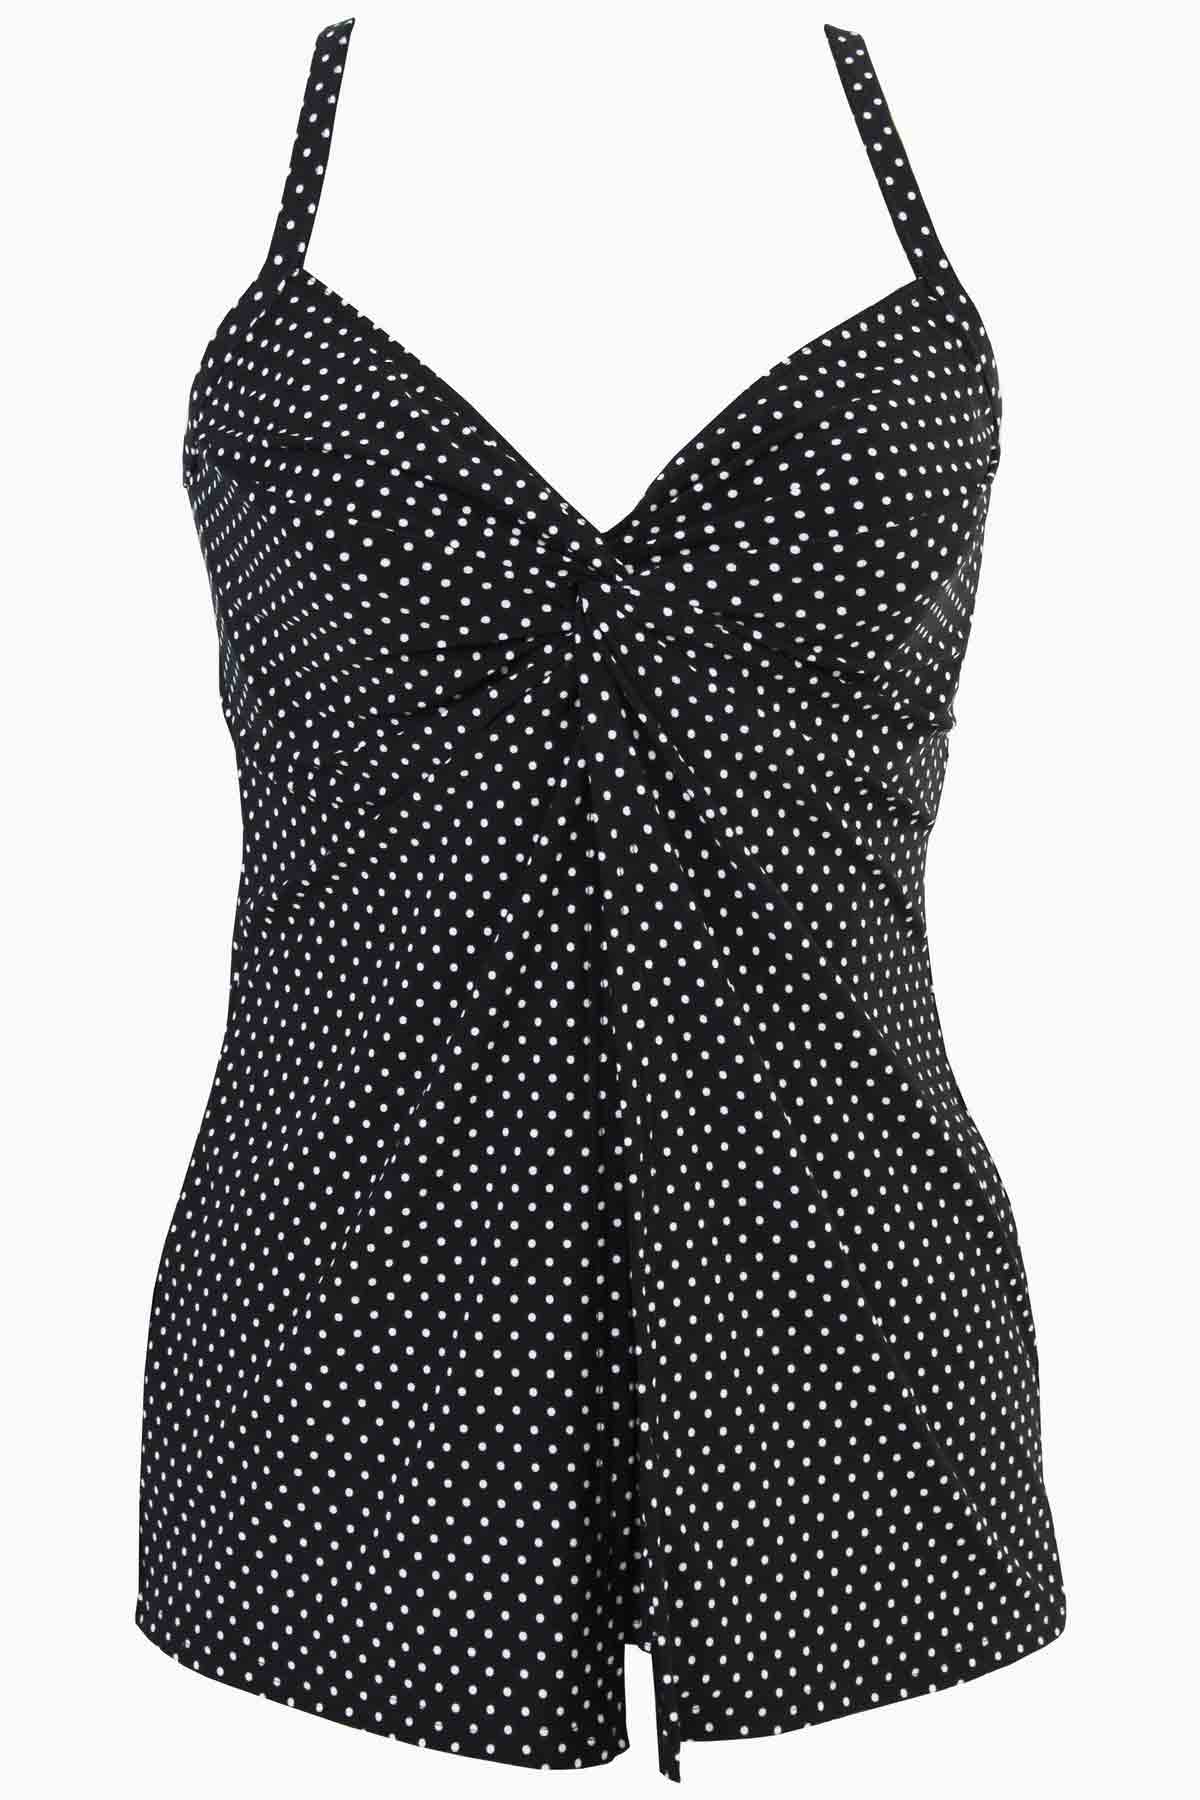 Miraclesuit Pin Point Love Knot Tankini